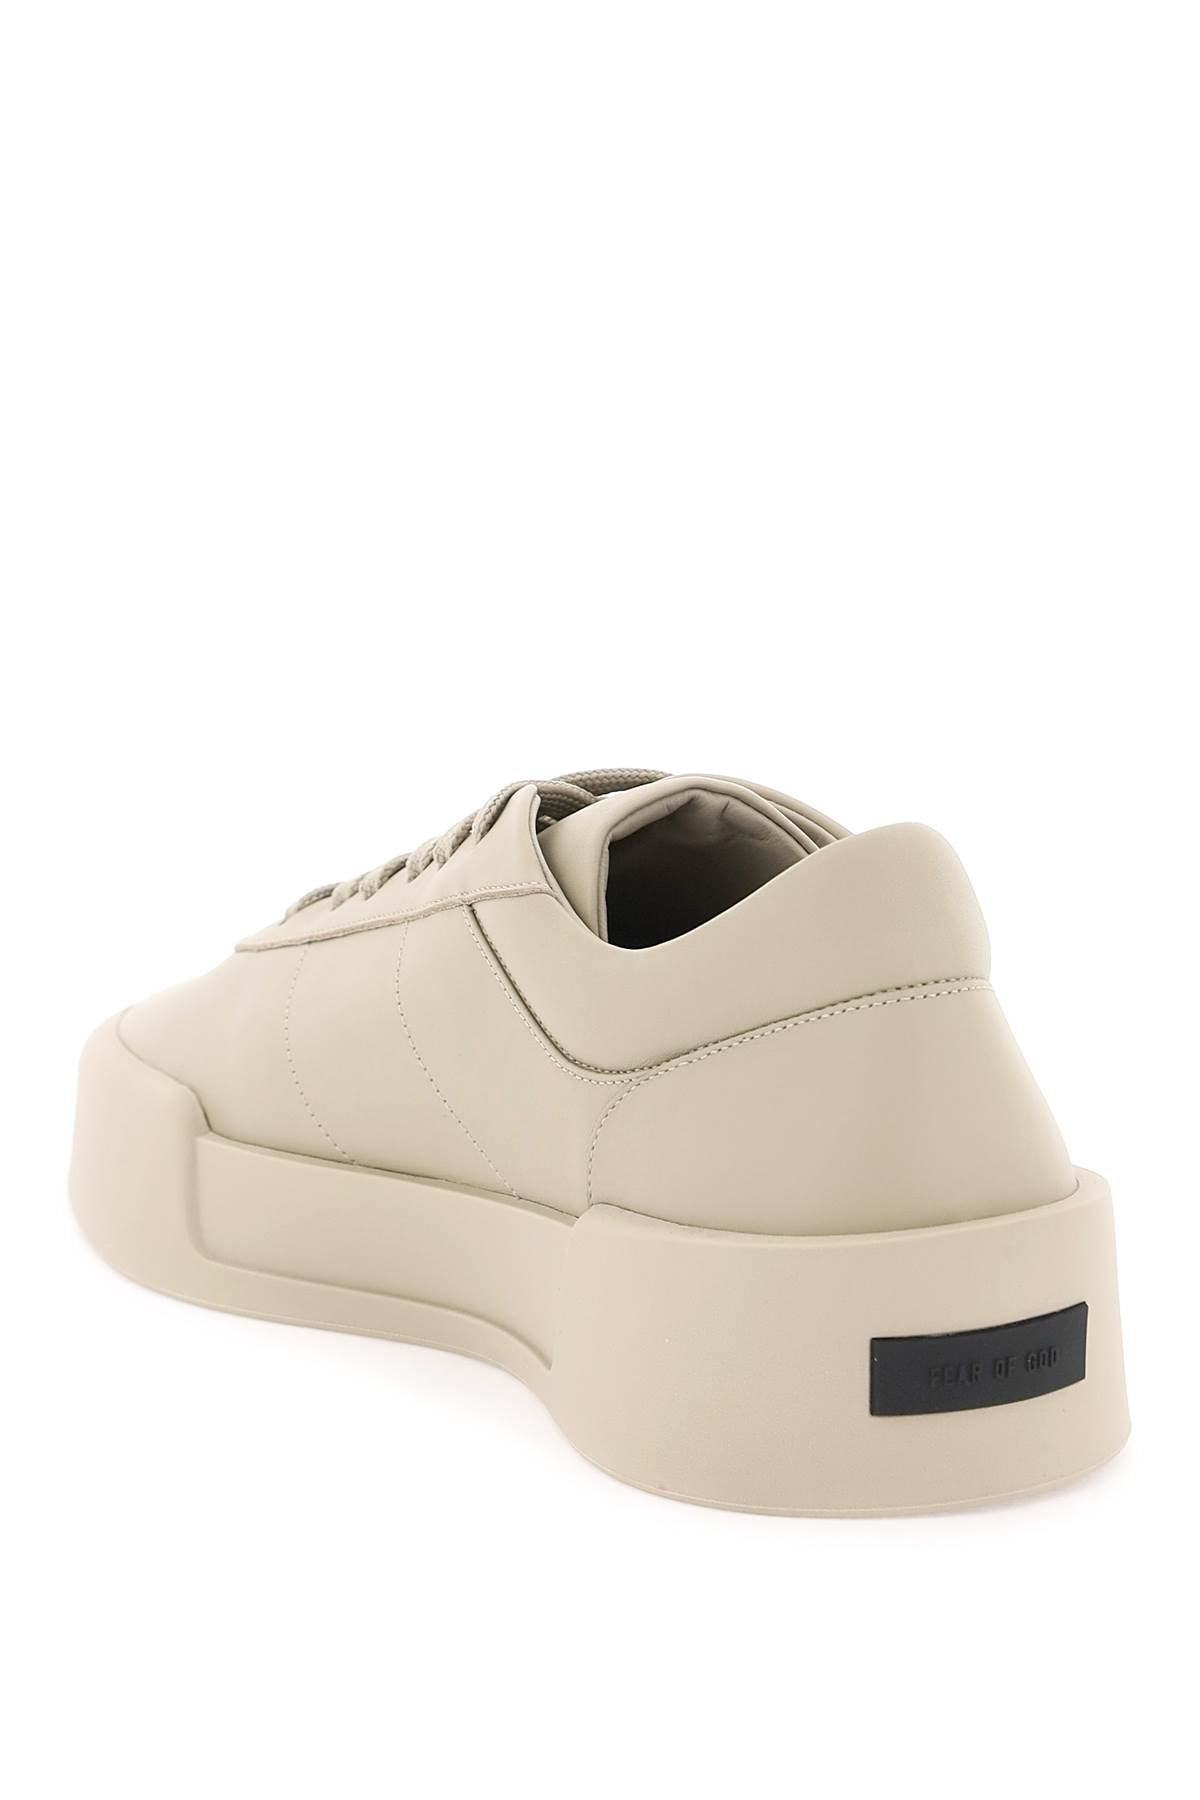 Fear of god low aerobic sneakers-2